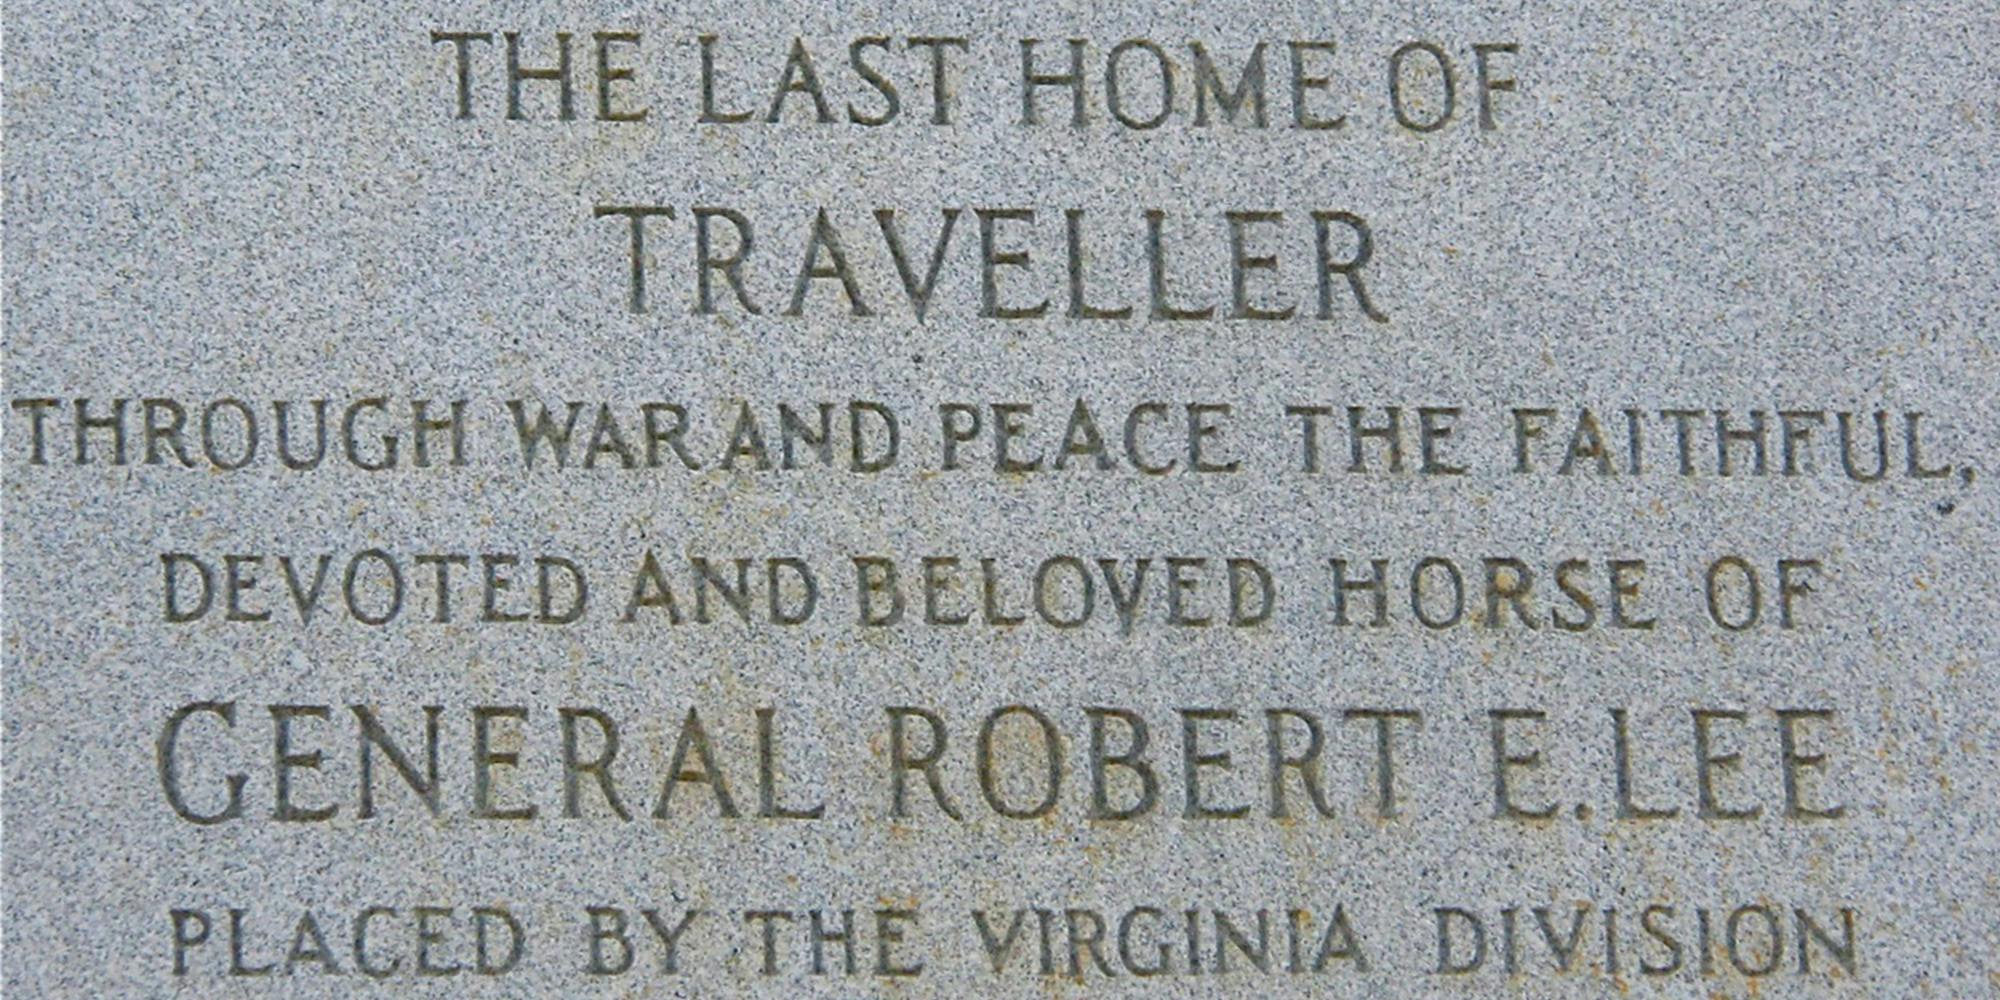 Robert E Lee horse plaque reading "The last home of Traveller through war and peace the faithful, devoted and beloved horse of General Robert E Lee placed by the Virginia division"